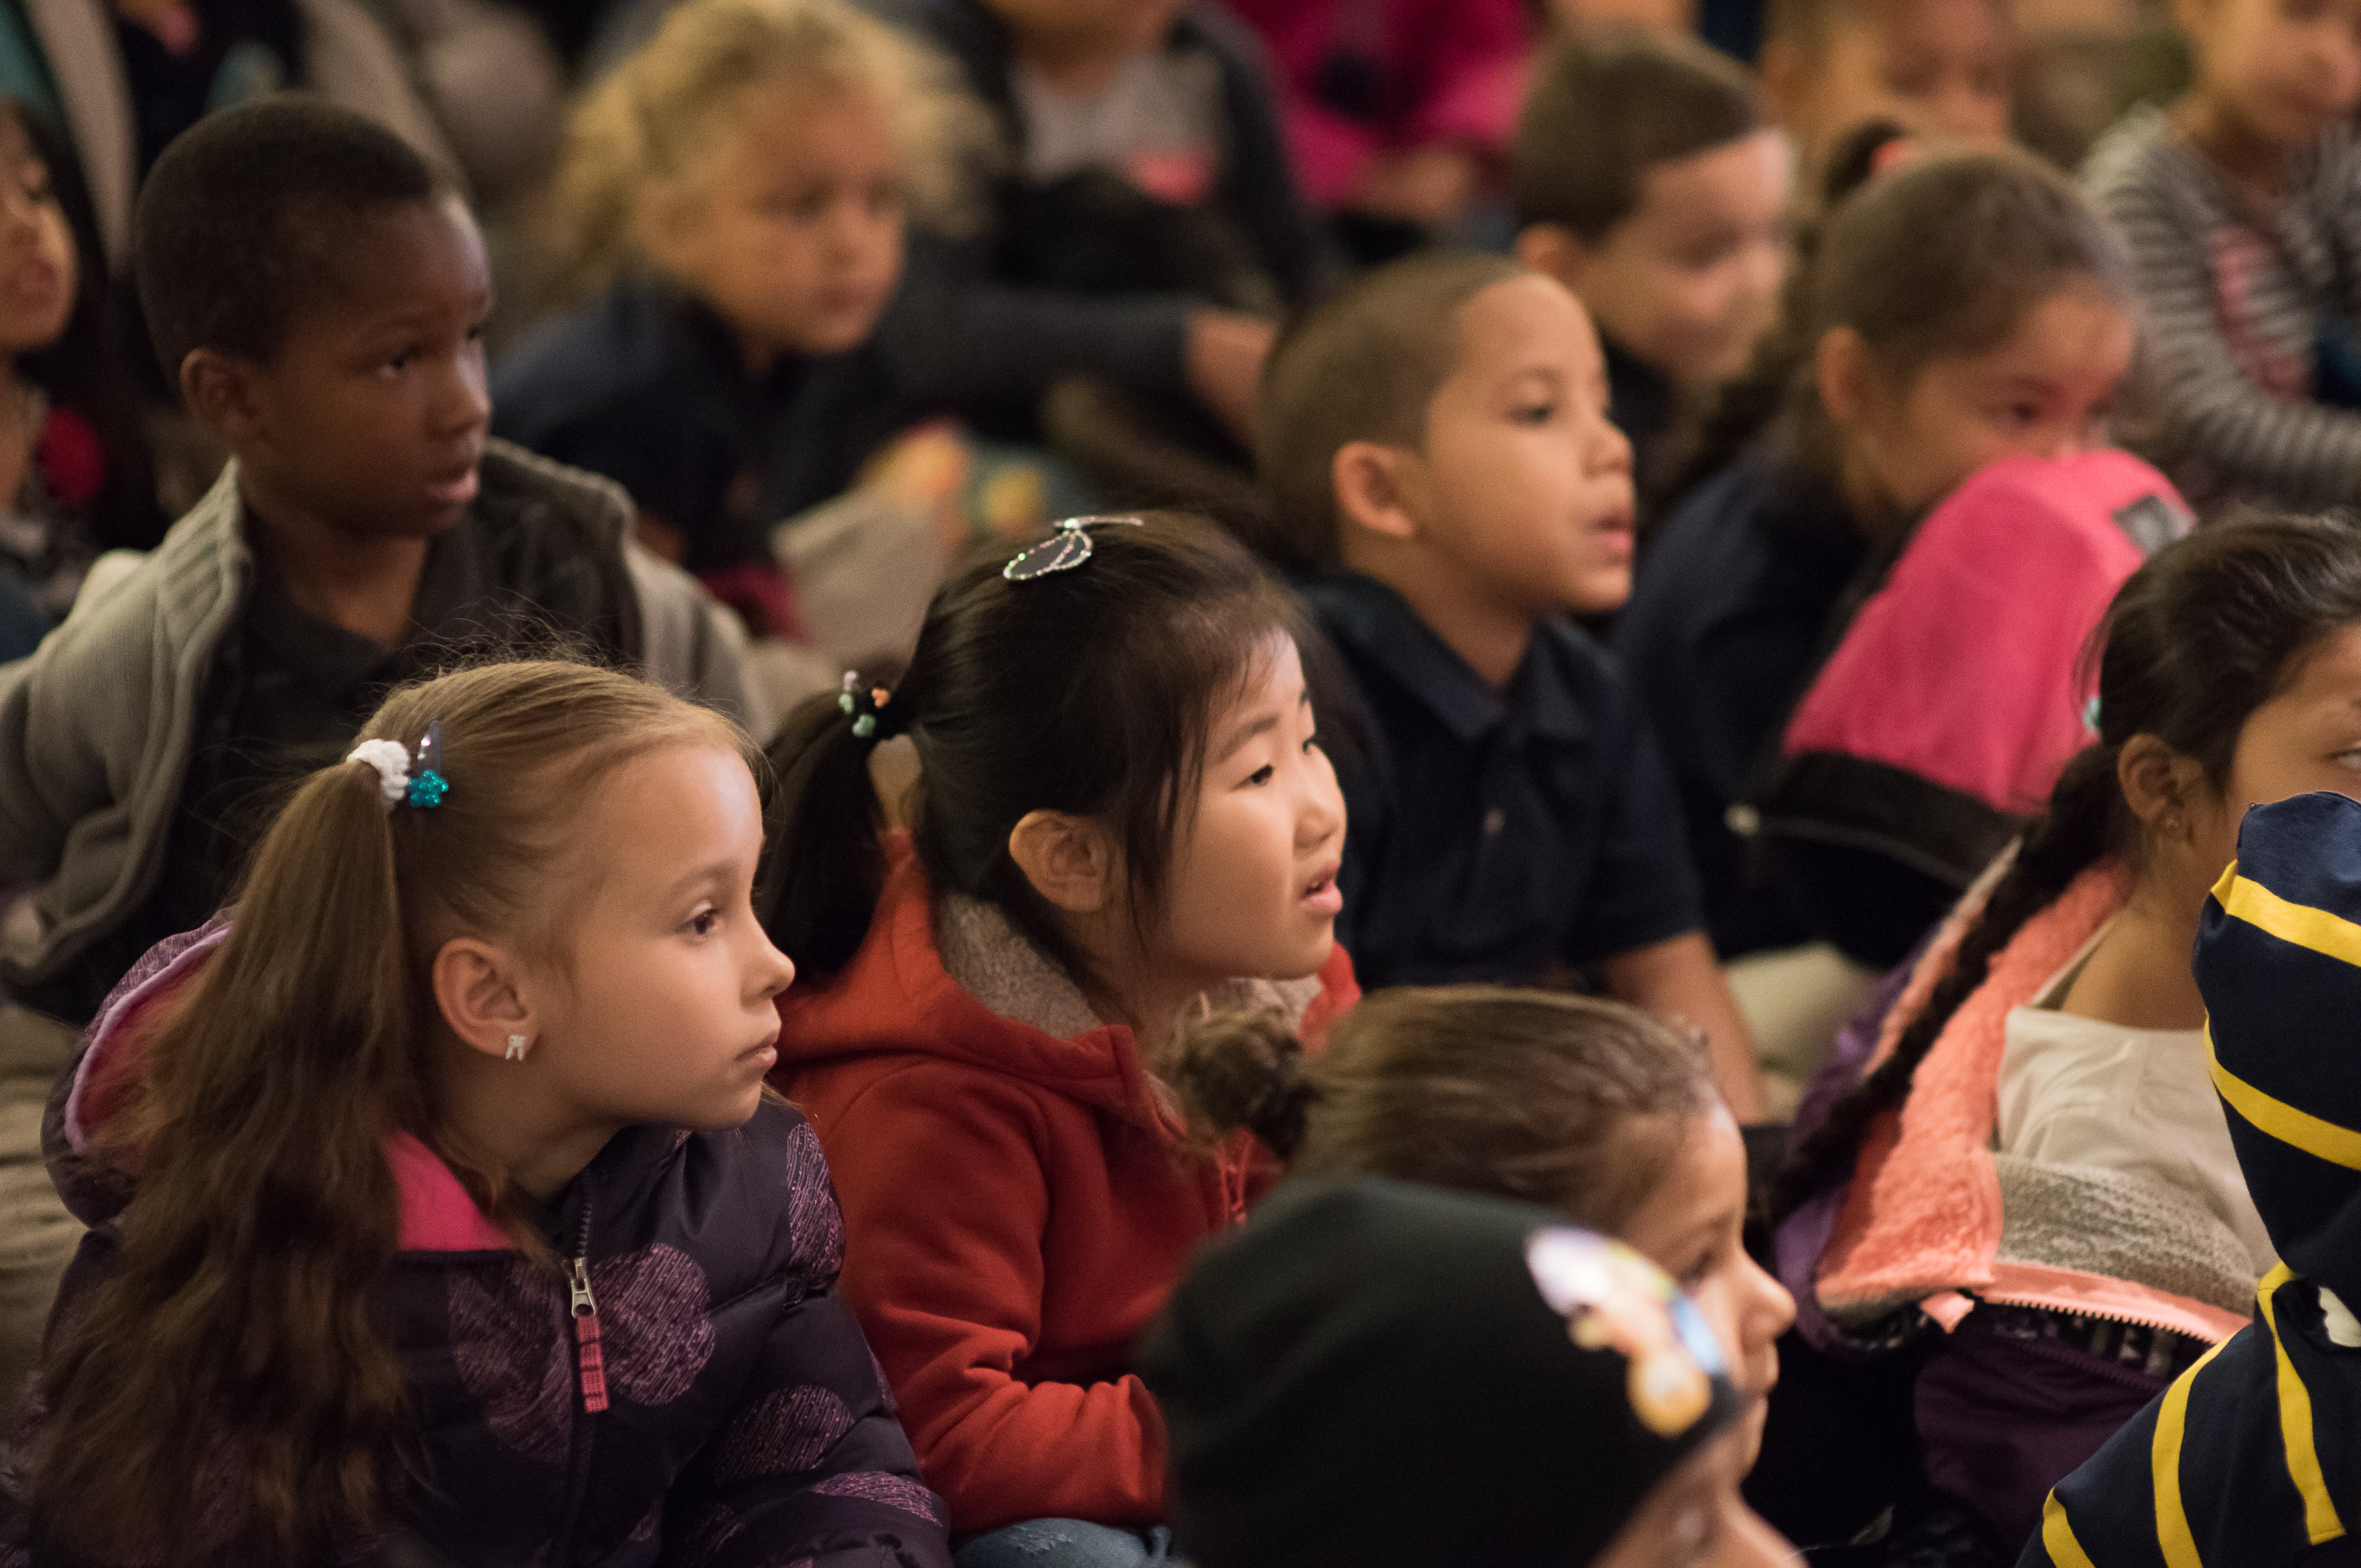 Group of children engaged in New York City Children's Theatre performance.